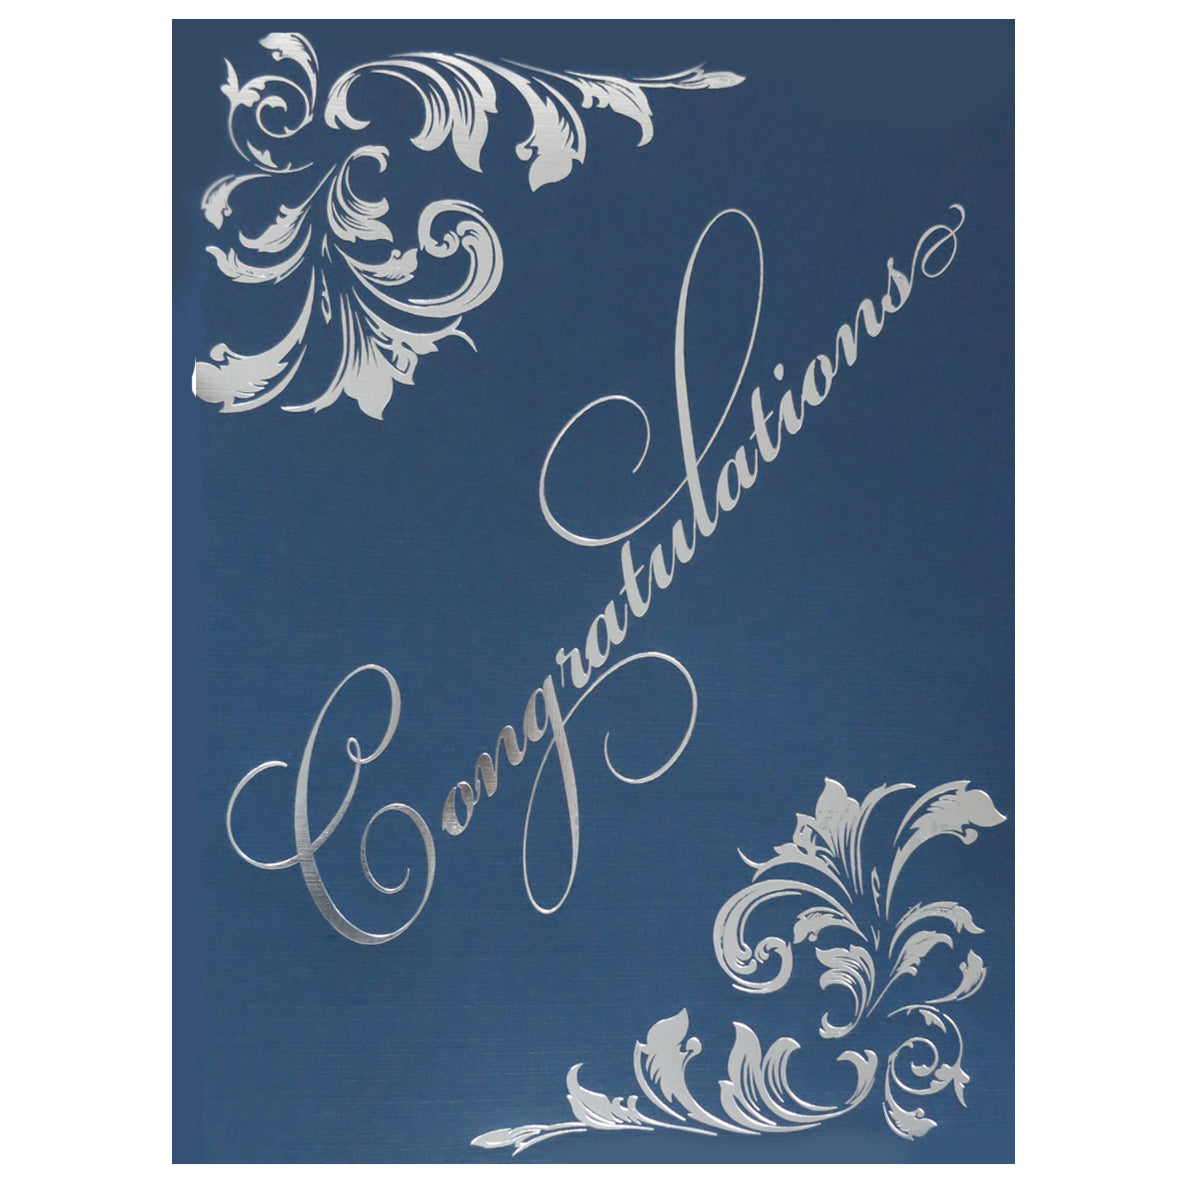 St. James® Certificate Holder with Gift Card Holder, Silver Foil Deco, Navy Blue, Pack of 5